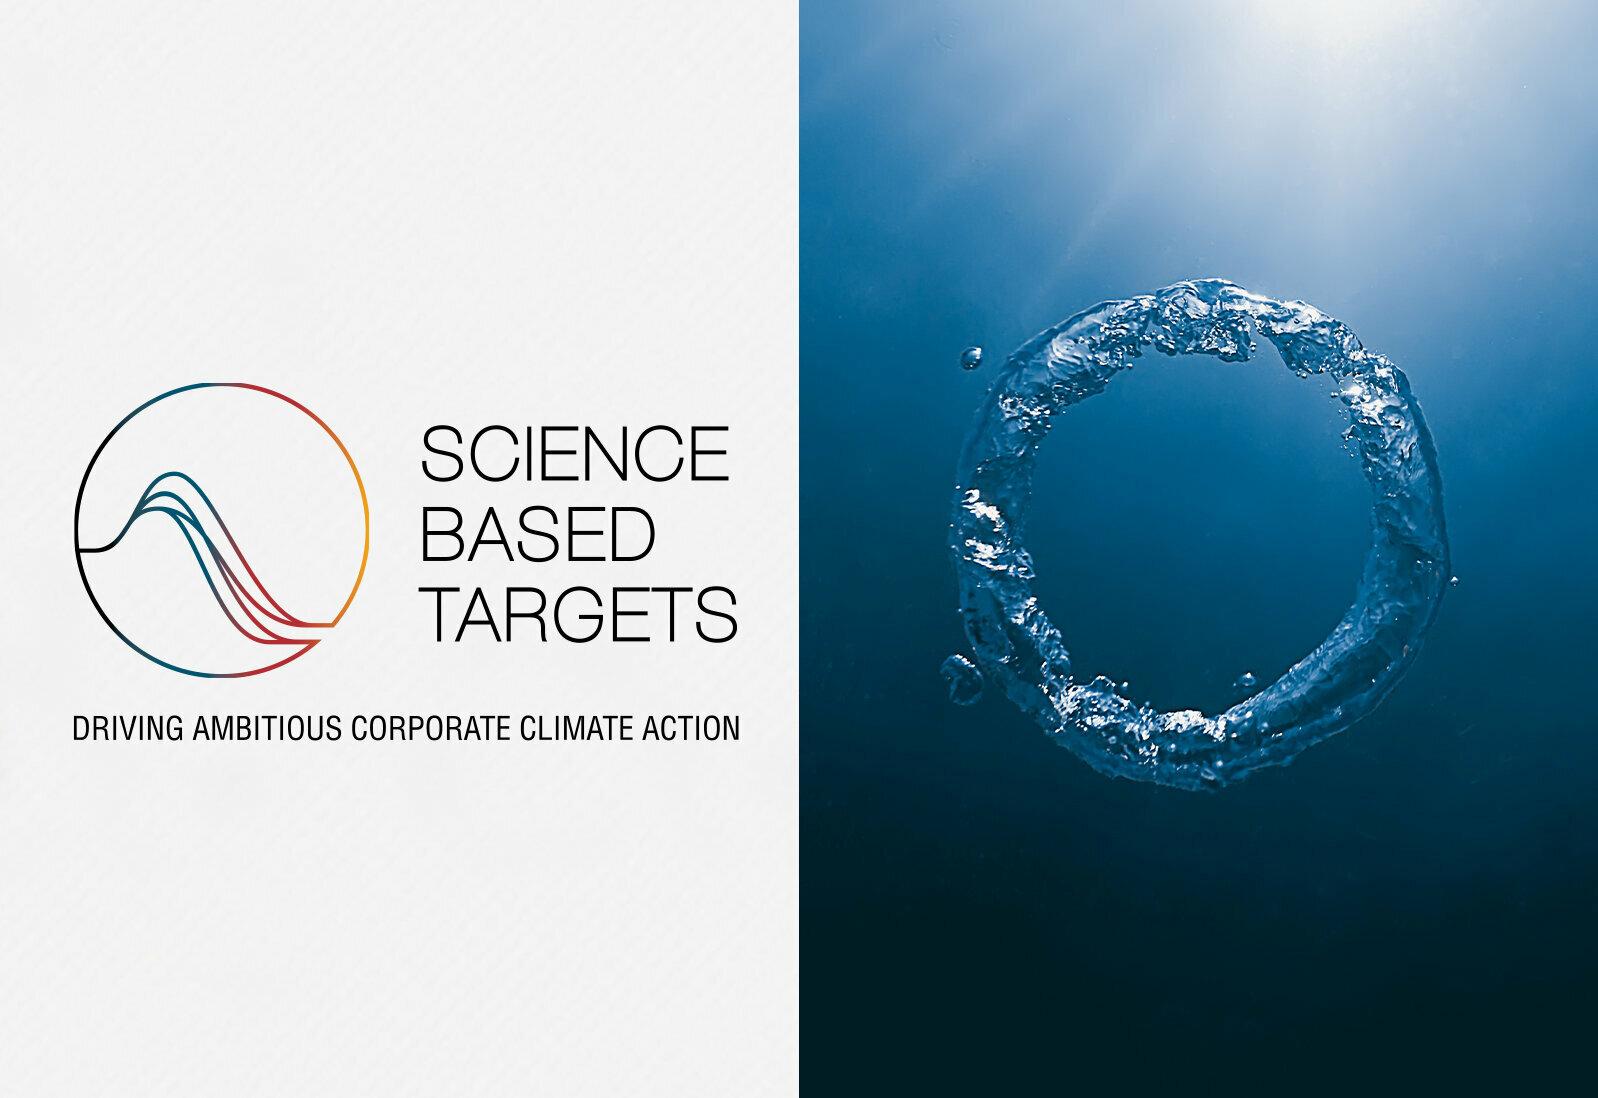 As part of its NET ZERO activities, SÜDPACK has signed the Commitment Letter of the Science Based Targets Initiative. Joining forces for effective corporate-level climate protection and achieving the goal of limiting global warming to 1.5°C.